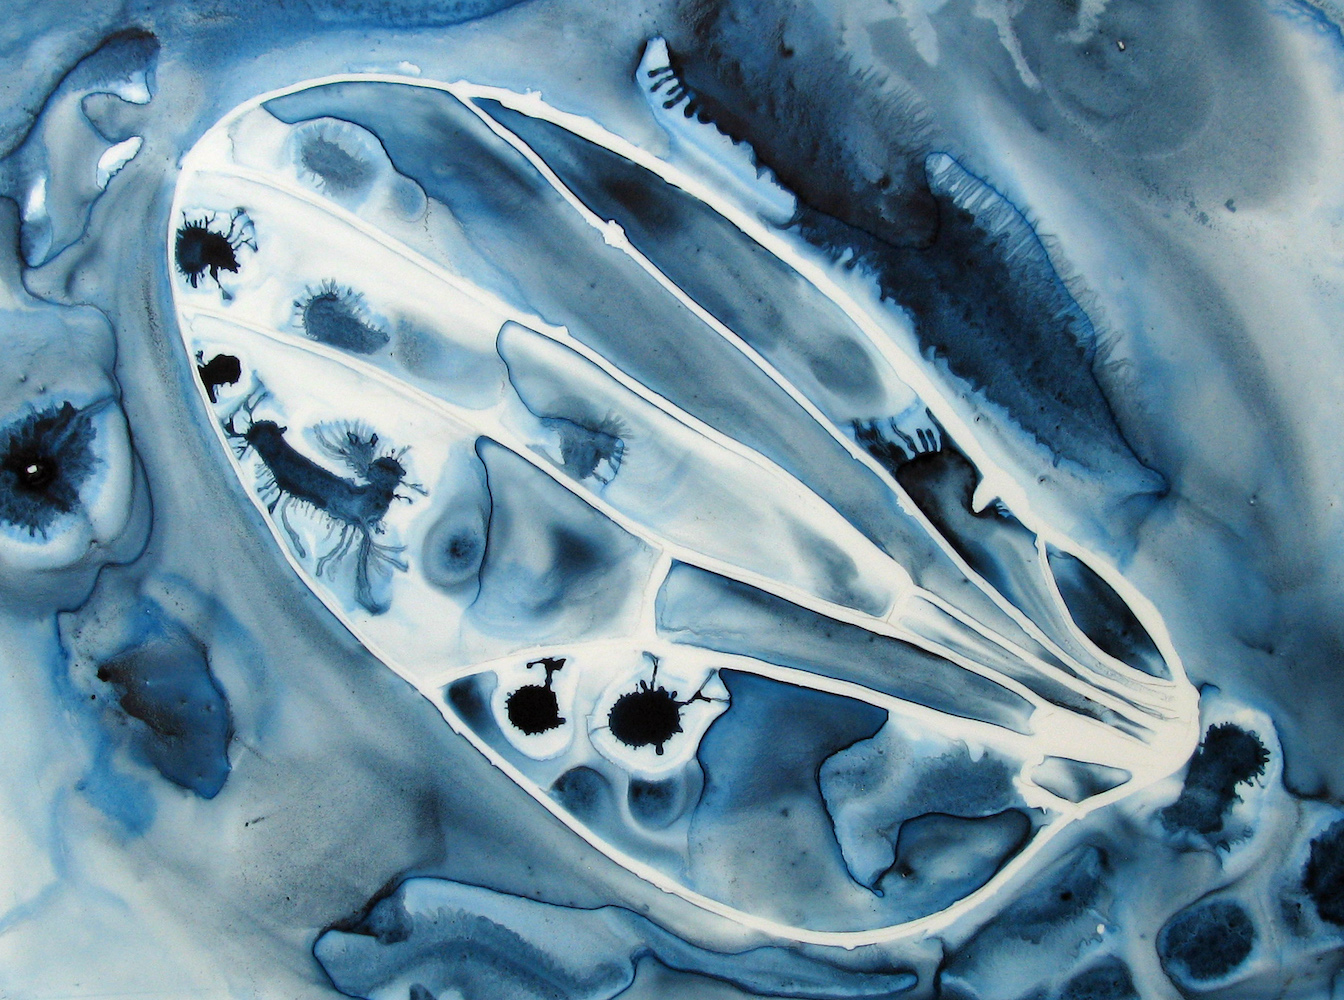 Gallery 4 - Michele Banks specializes in ink paintings of various views of the wing of the fruit fly (drosophia).